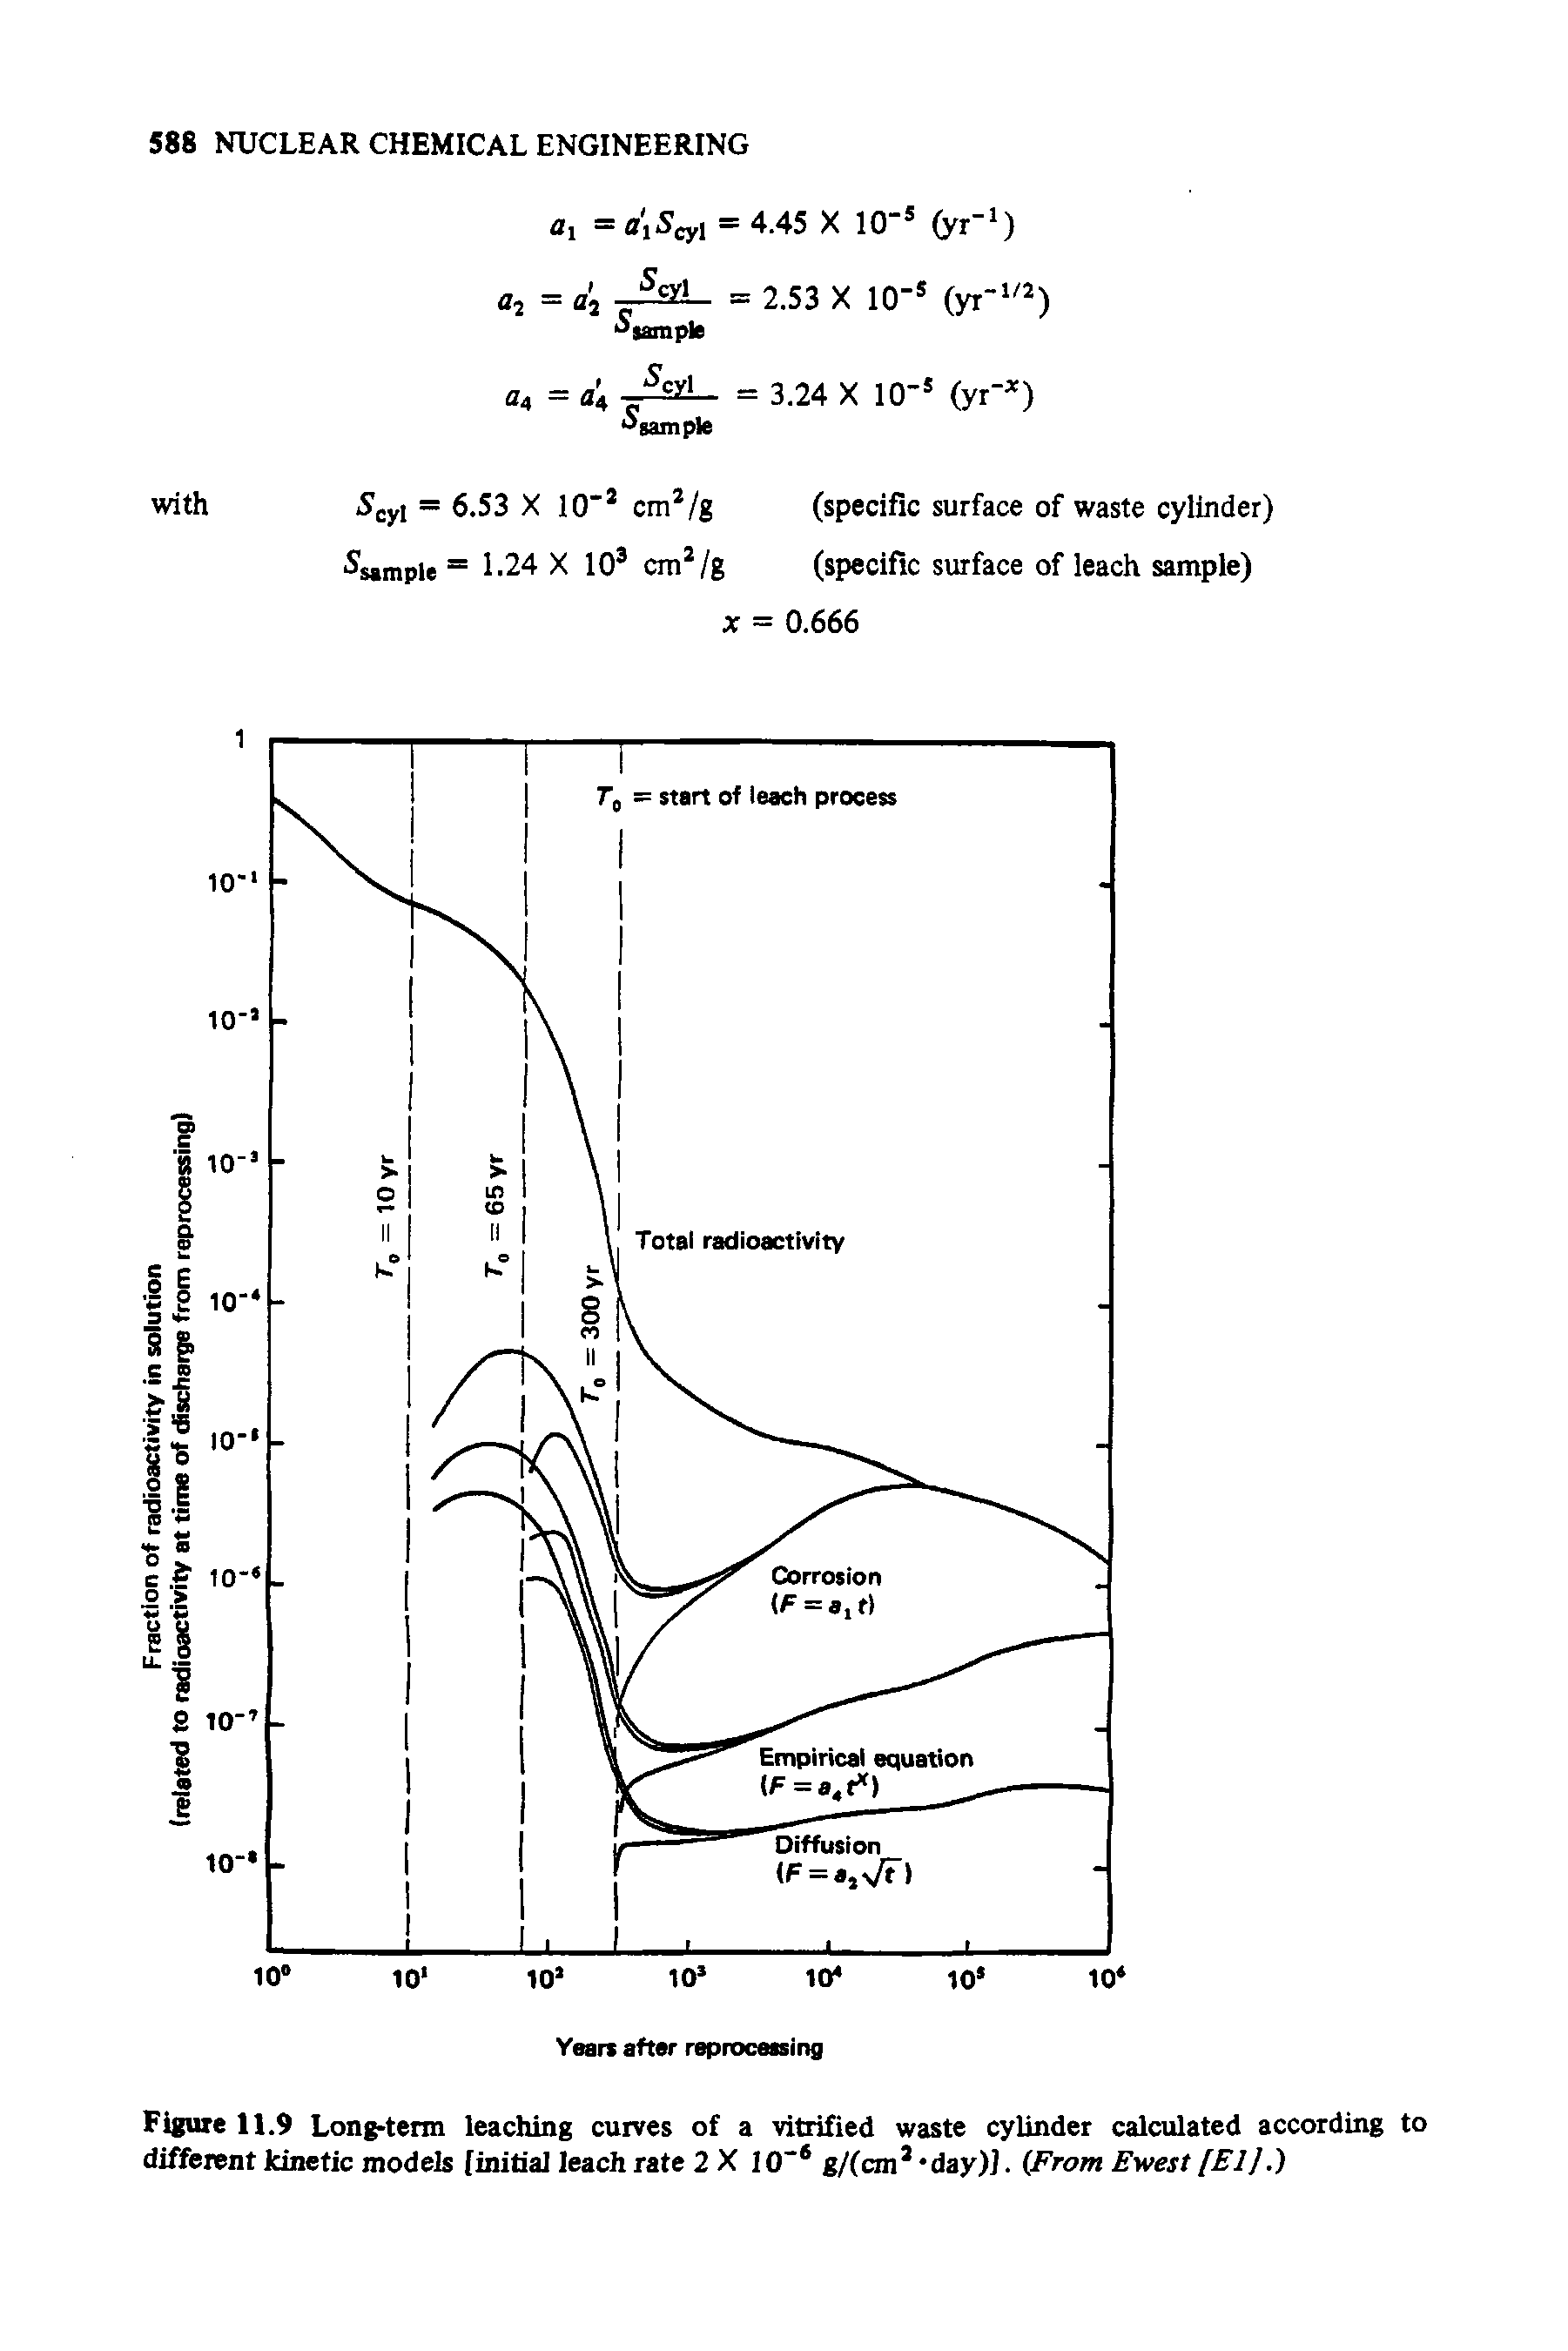 Figure 11.9 Long-term leaching curves of a vitrified waste cylinder calculated according to different kinetic models [initial leach rate 2 X 10 g/(cm day)). (From Ewest[ElJ.)...